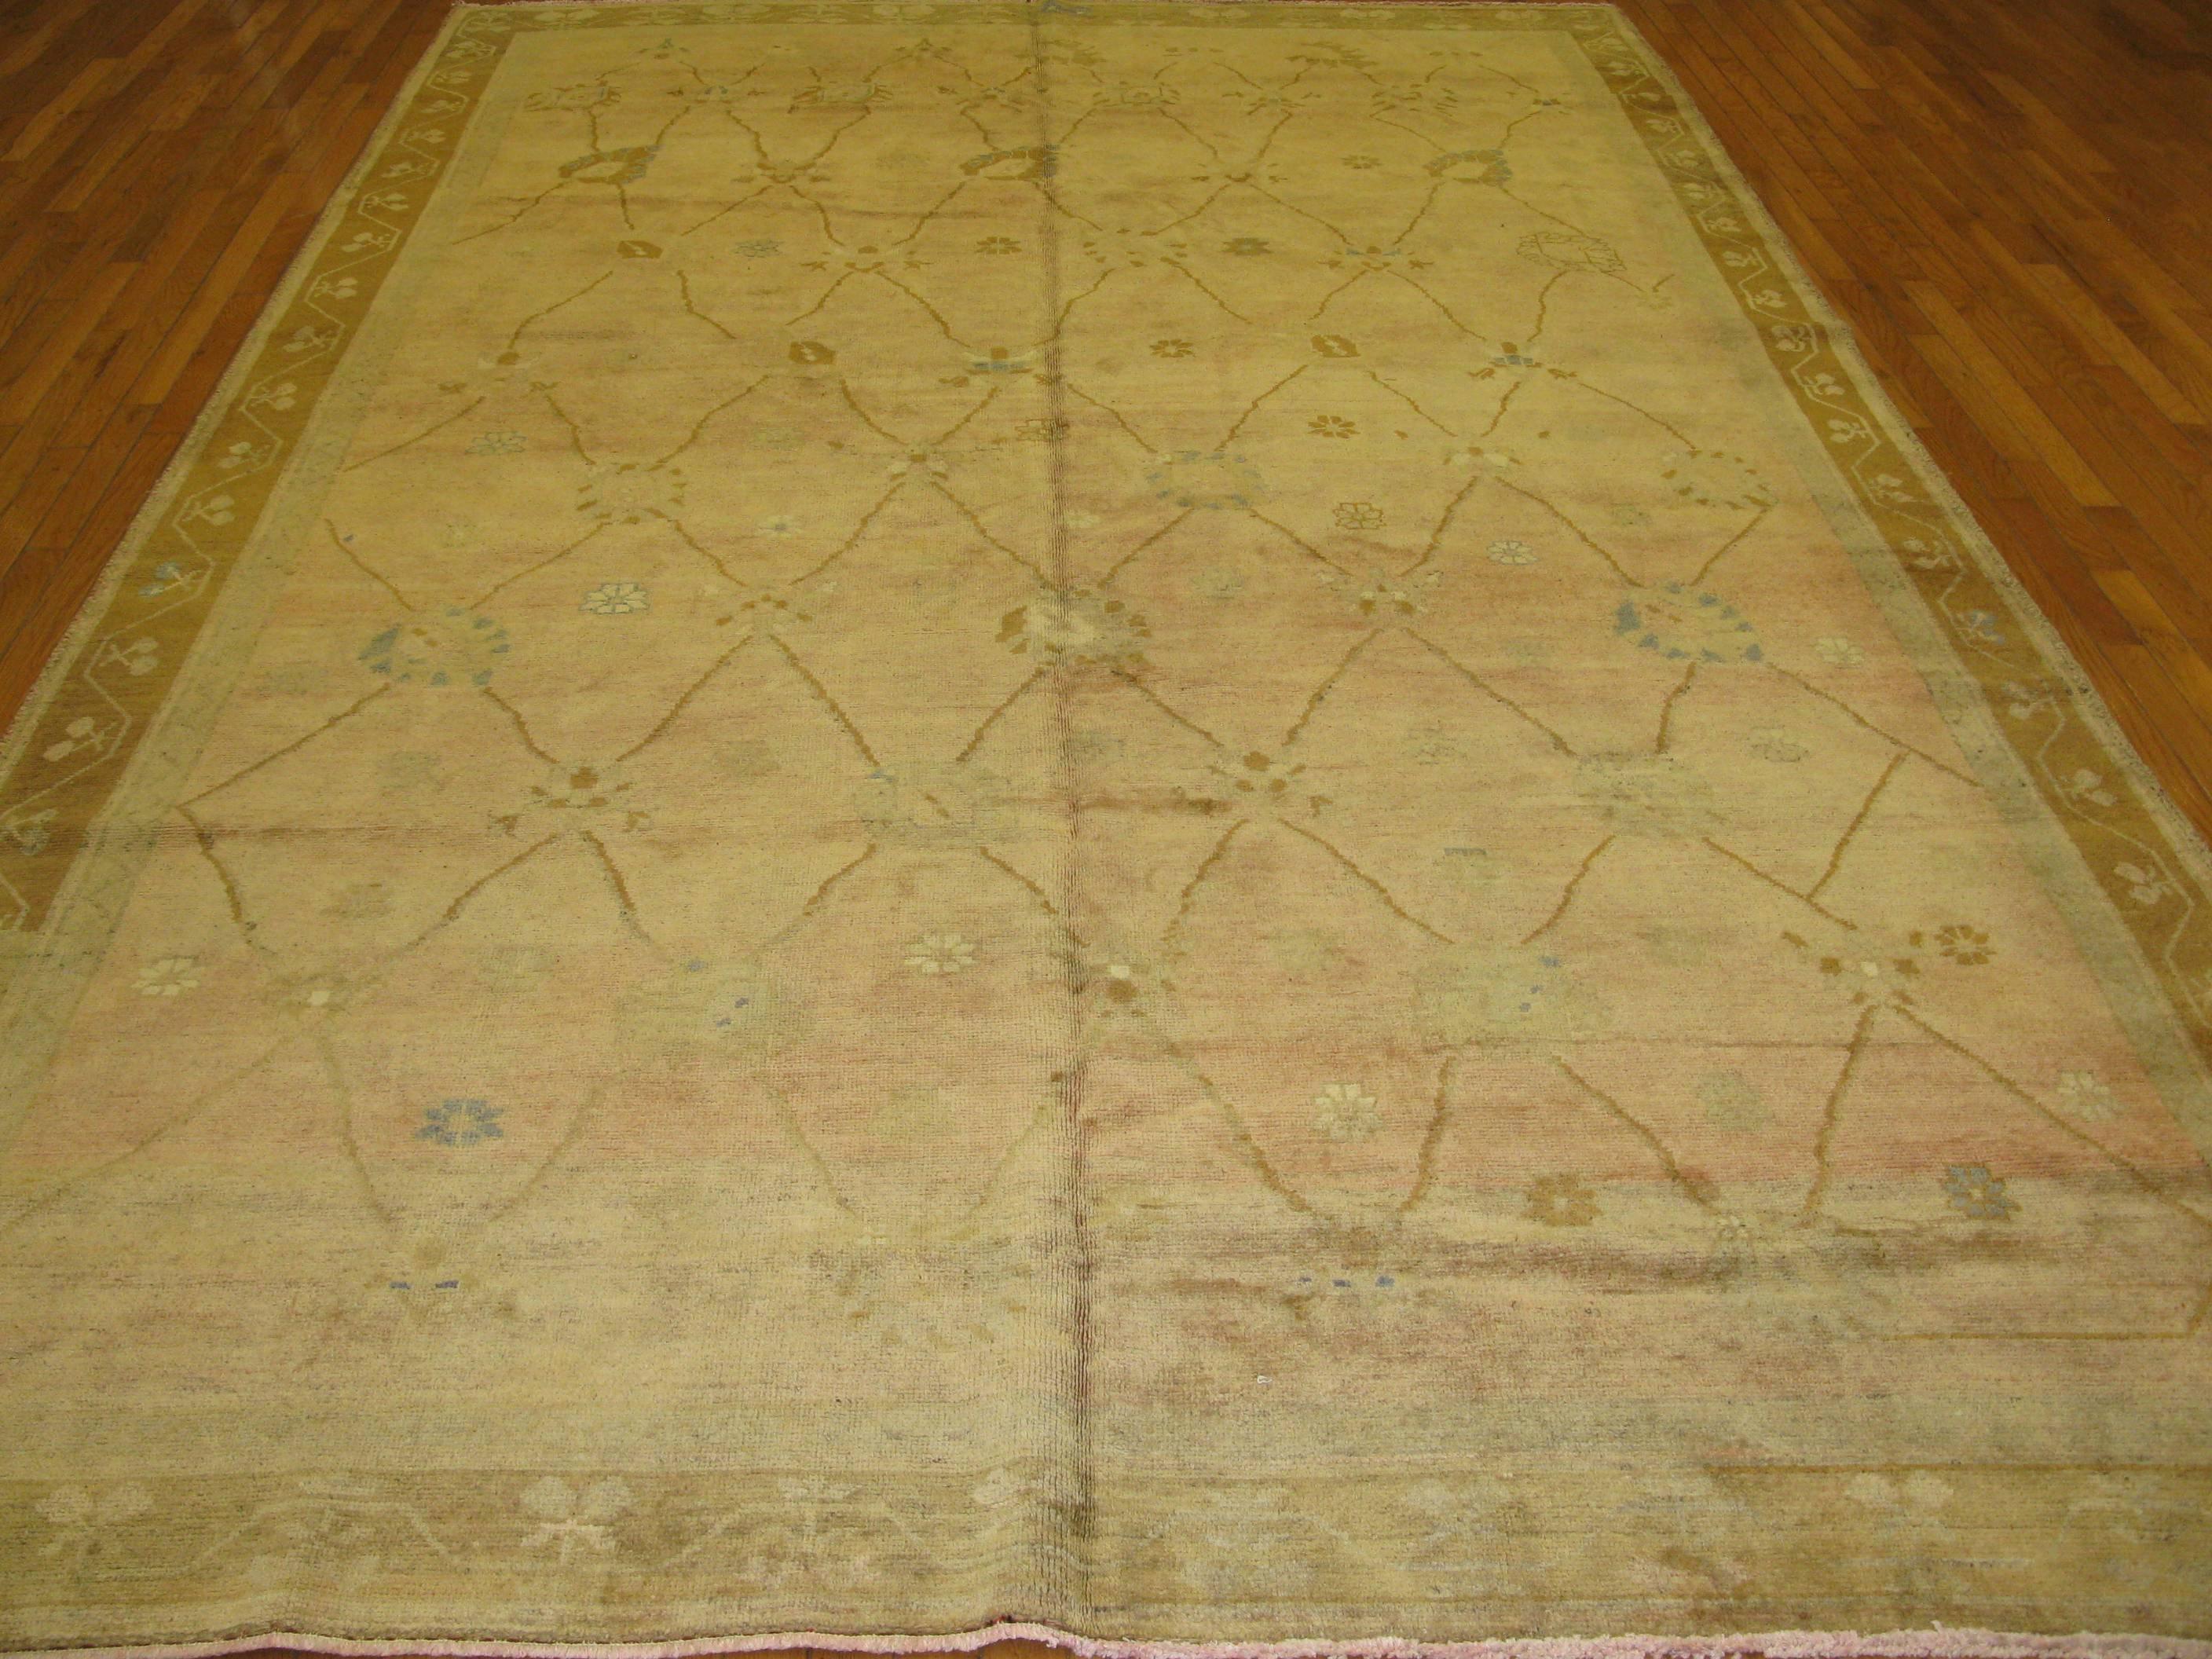 This is a unique hand-knotted antique washed Turkish rug from the Kars area.
It has a beautiful trellis pattern on a soft aged melon color background color. It measures 7' 6'' x 12' 1'' and is in very good condition.